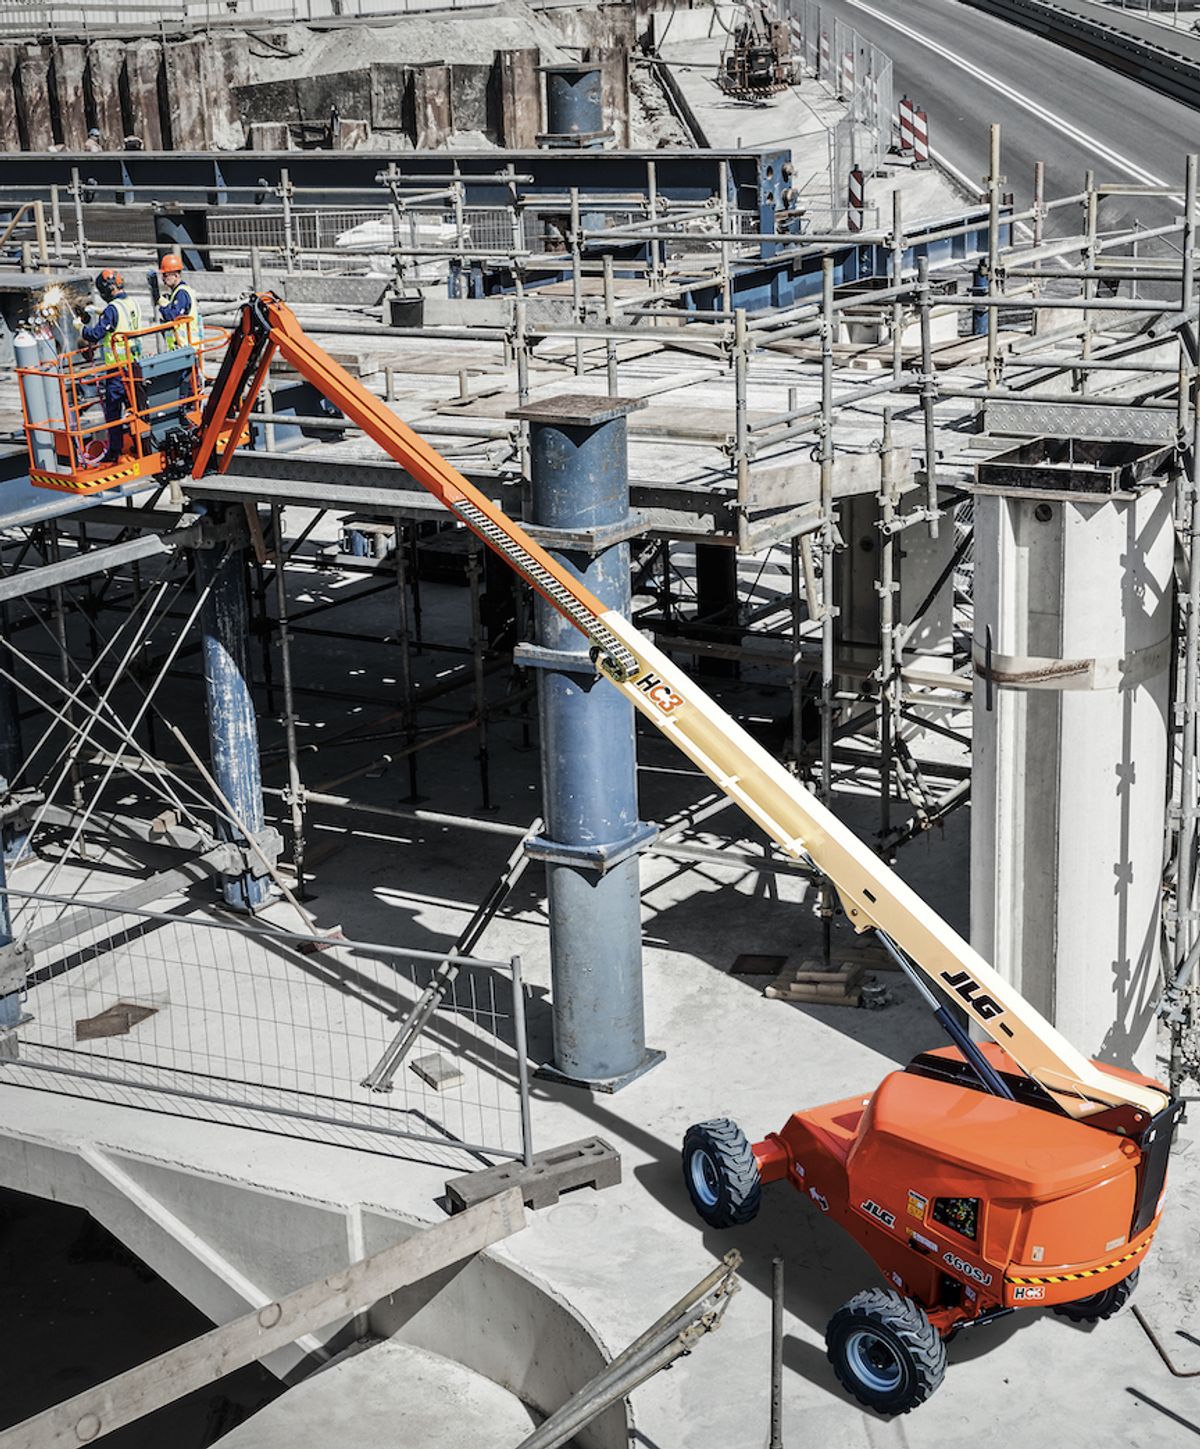 JLG’s 8 New HC3 Boom Lifts Prevent Overloading With Load-Sensing Technology